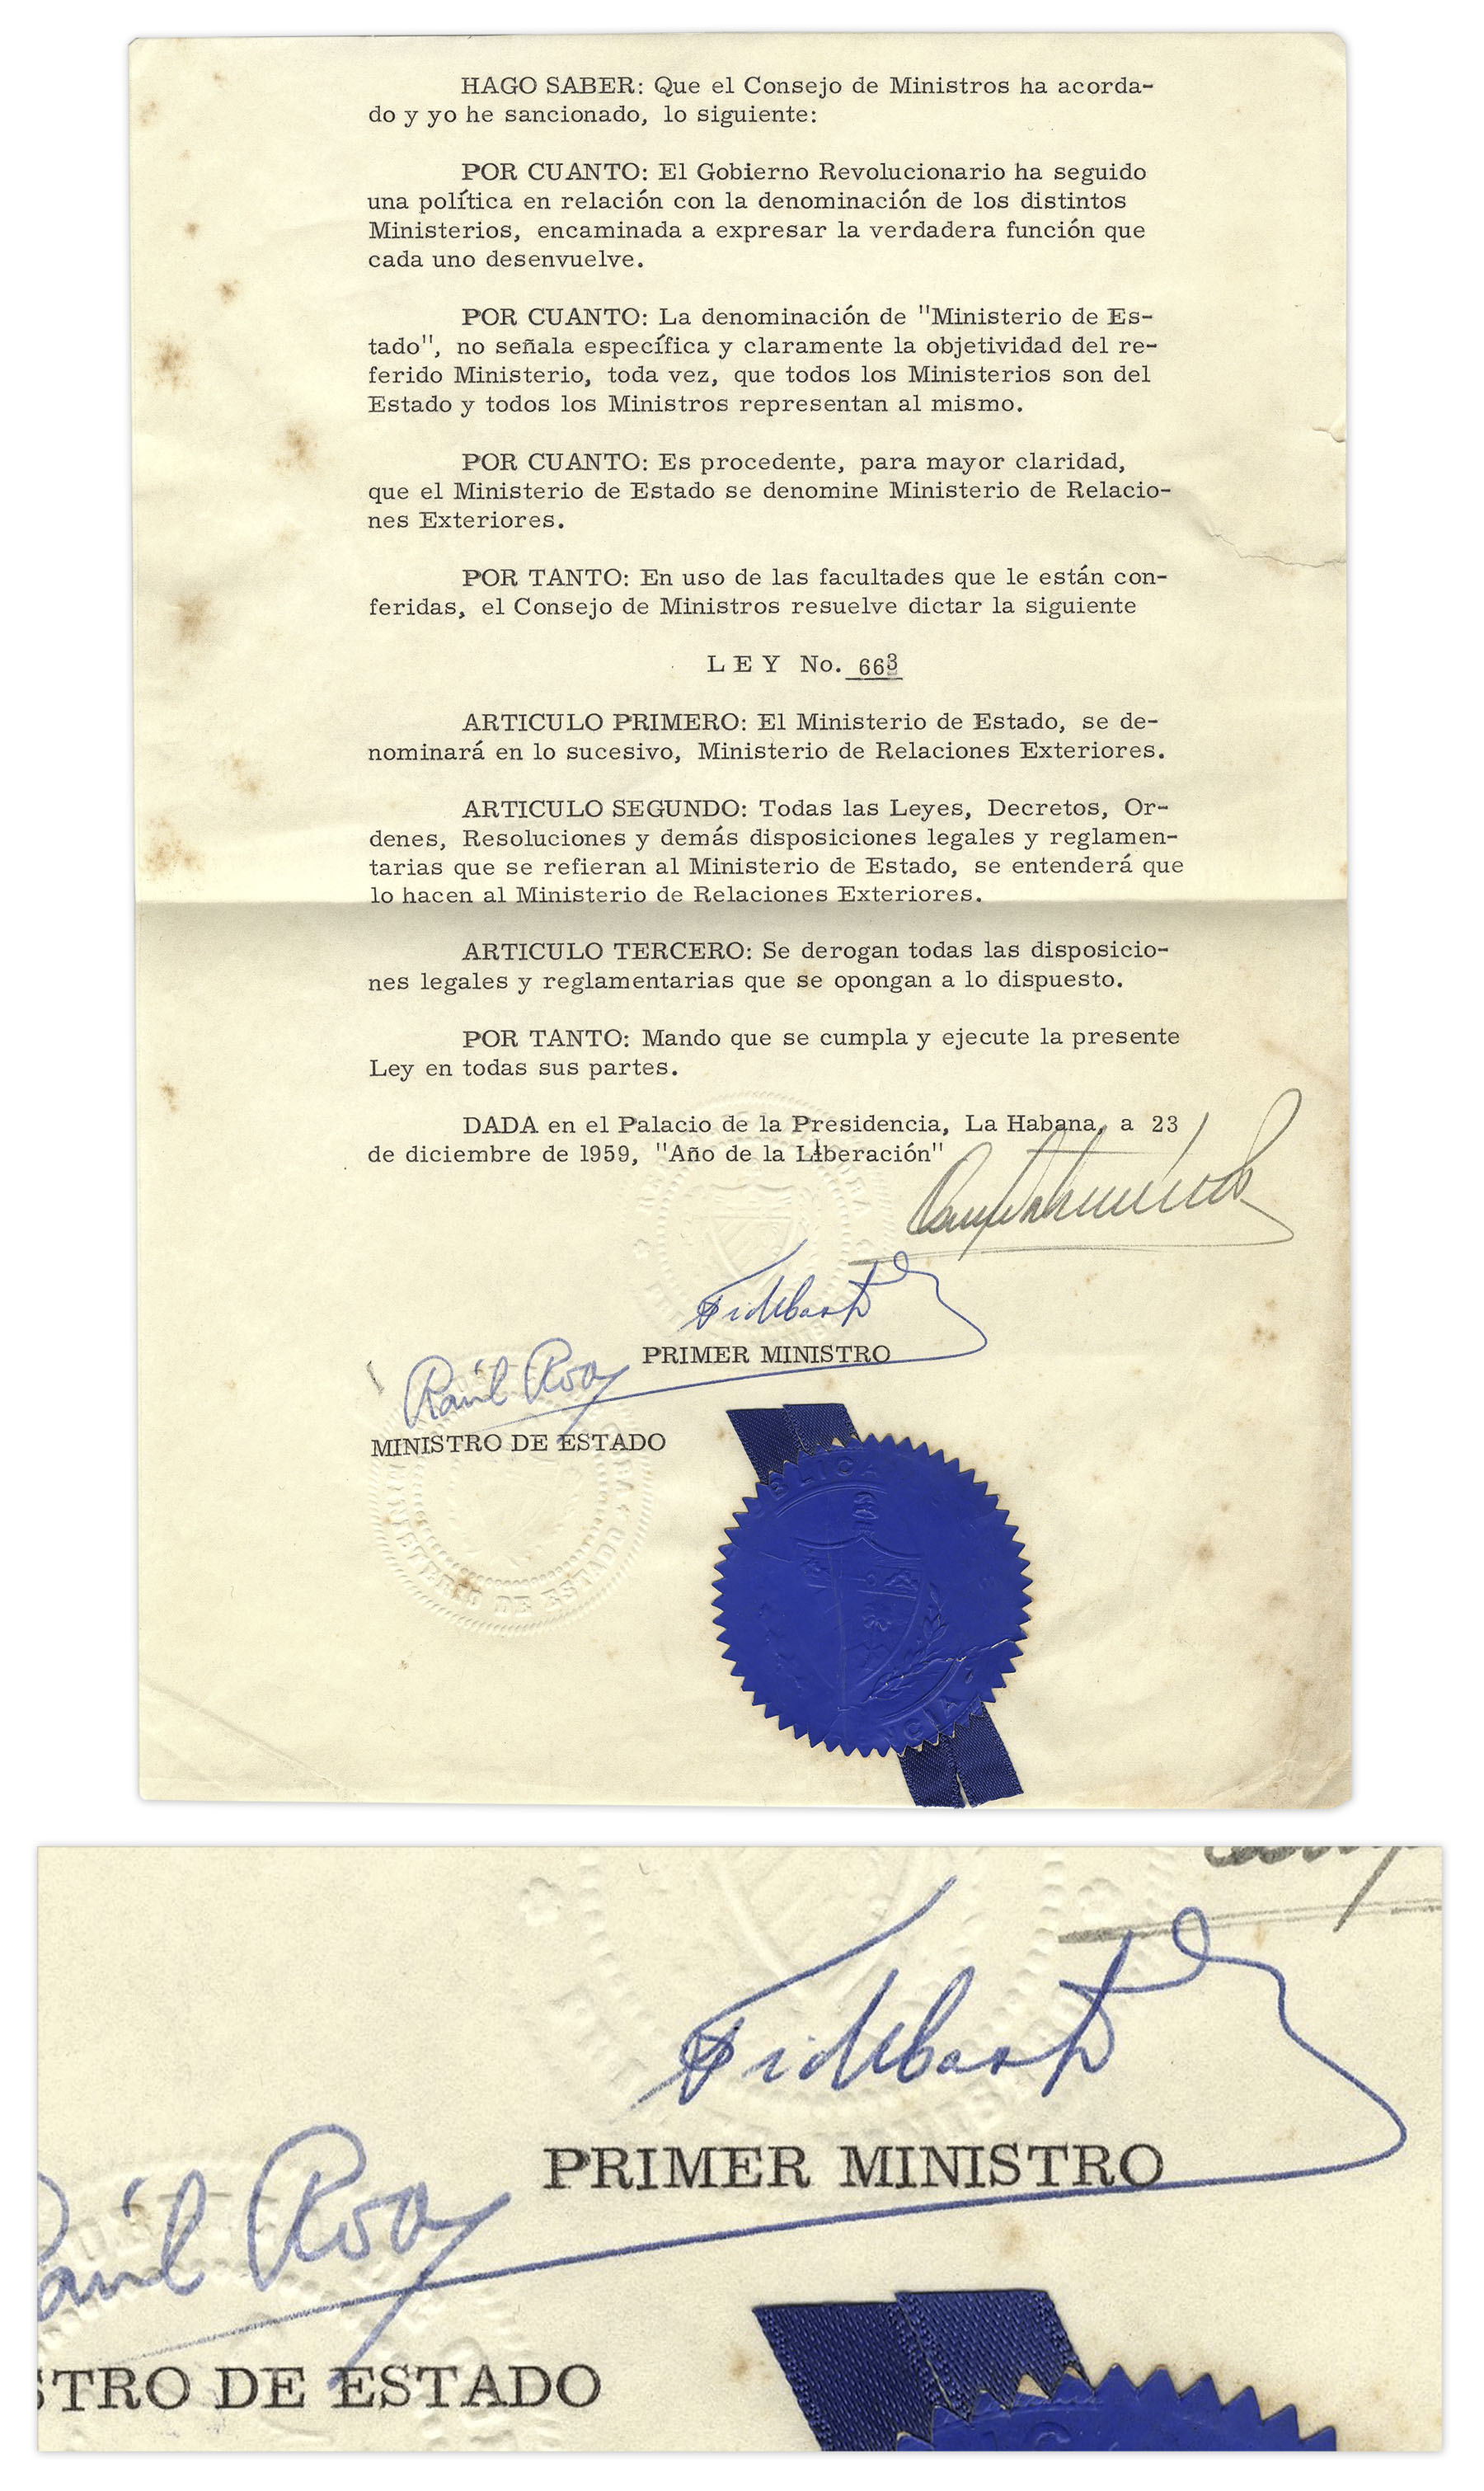 World Leaders Rare Fidel Castro Document Signed as Cuba's Prime Minister in 1959, the ''Year of